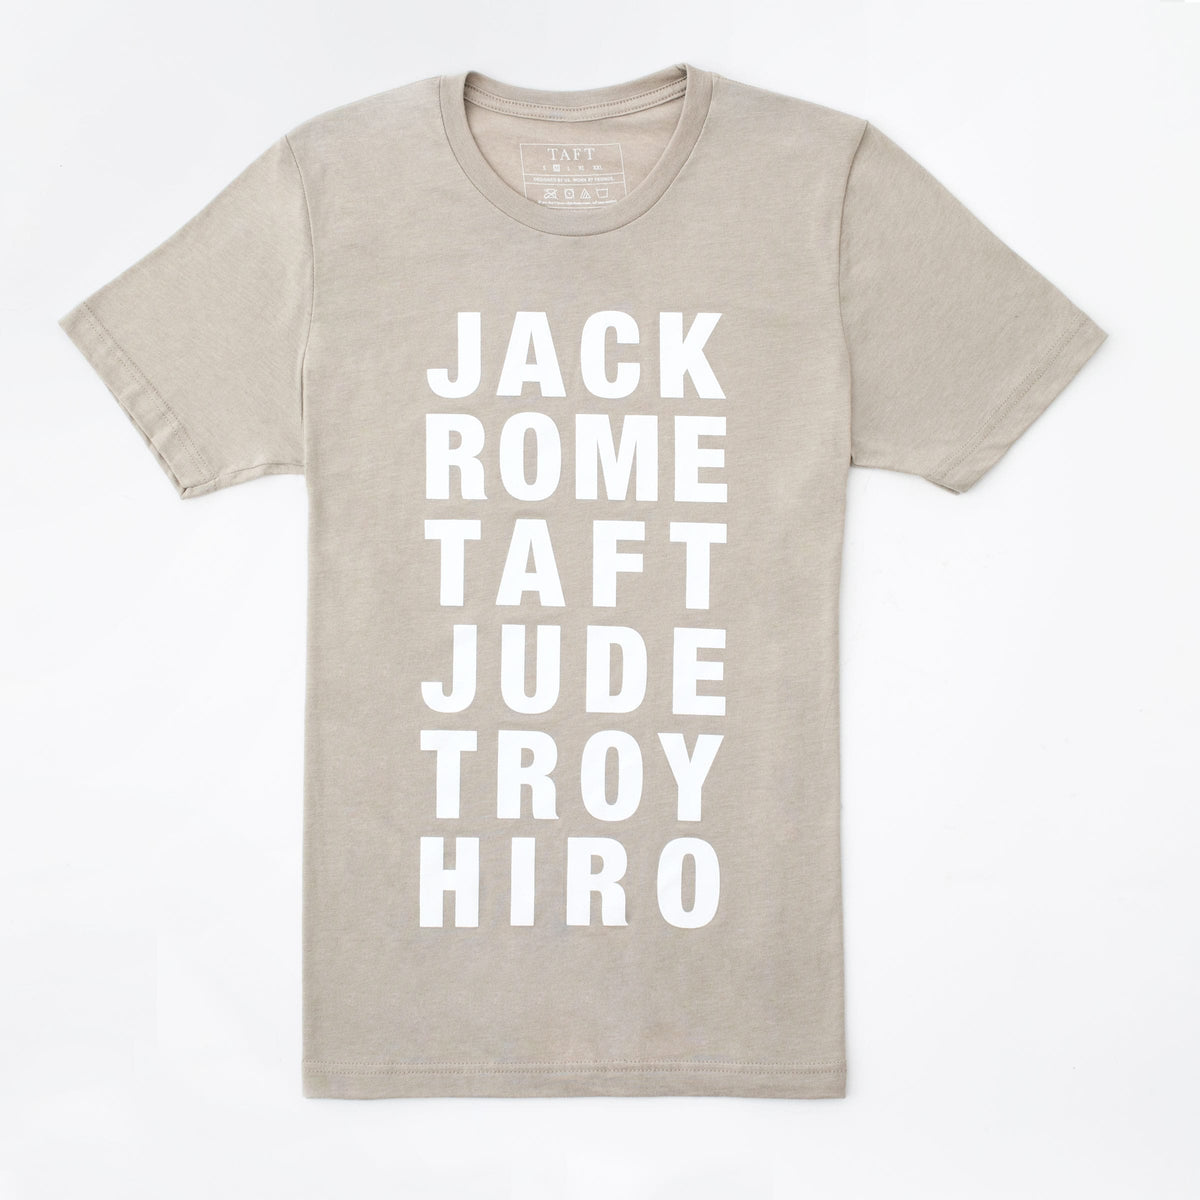 Icon T-shirt in Wheat that says "JACK ROME TAFT JUDE TROY HIRO" in white block letters